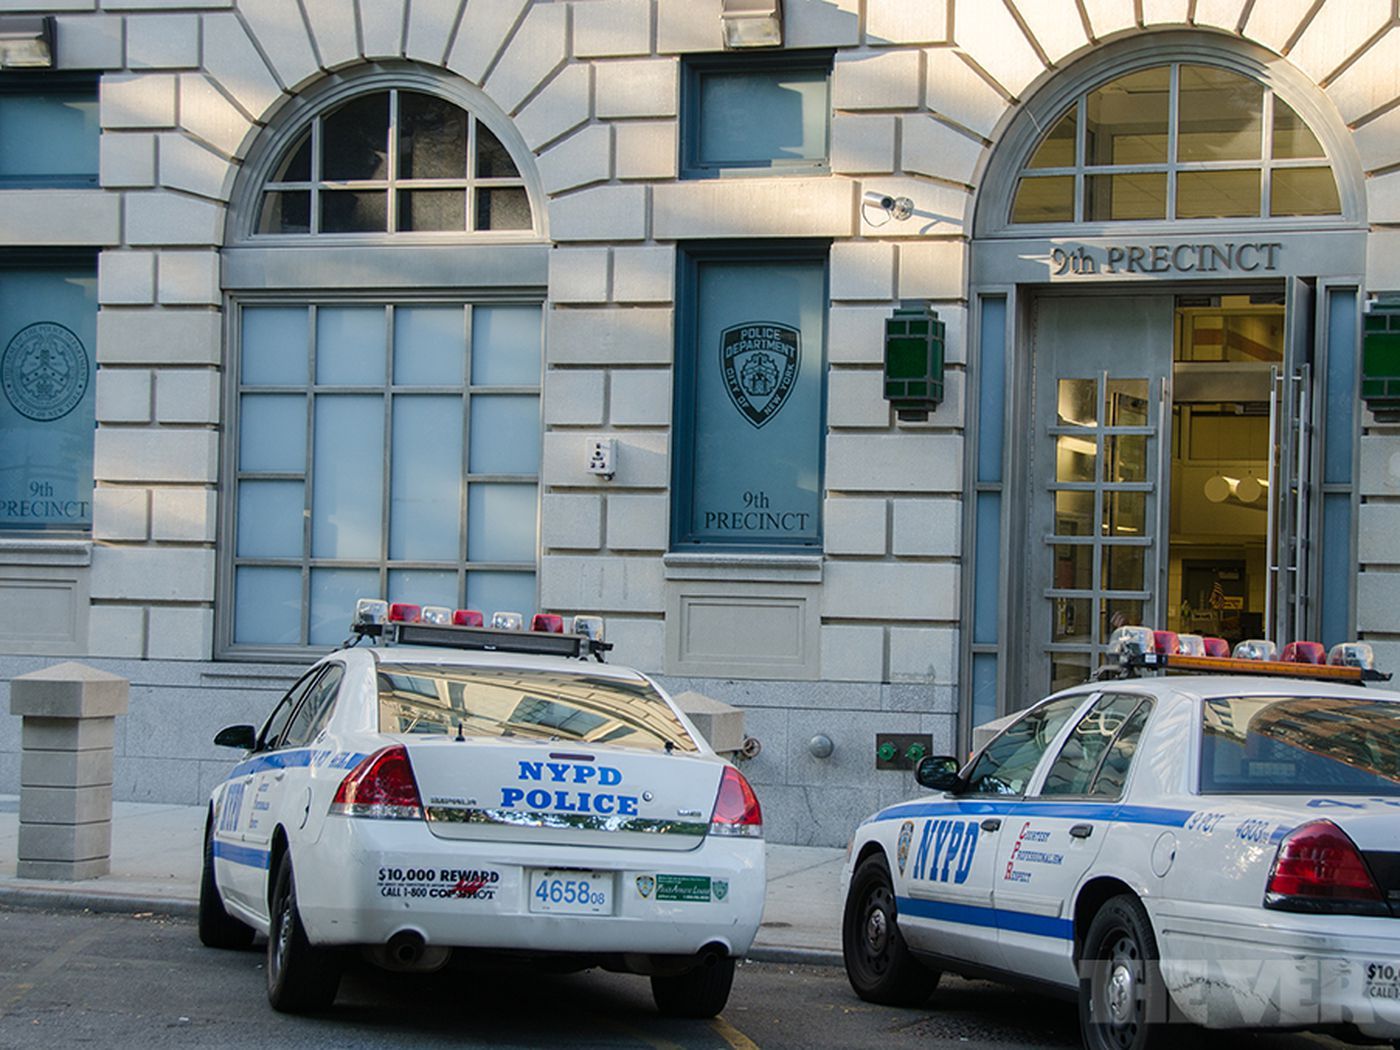 The NYPD is using a new pattern recognition system to help solve crimes